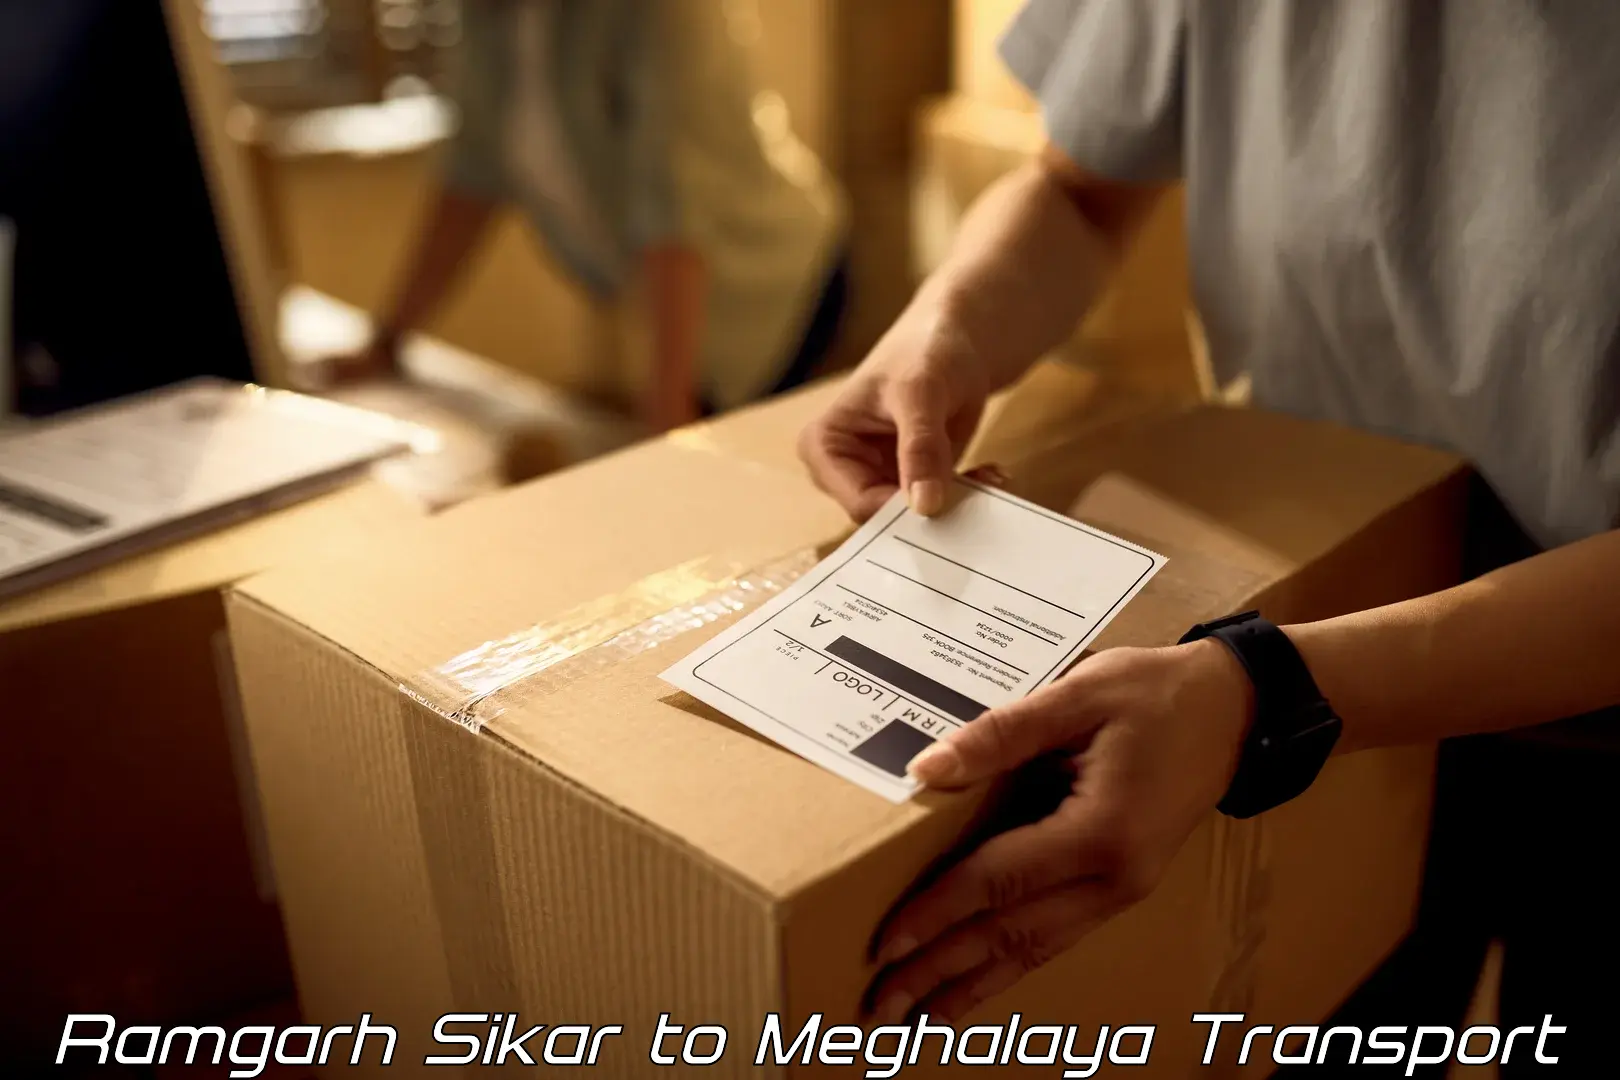 Vehicle parcel service Ramgarh Sikar to Umsaw